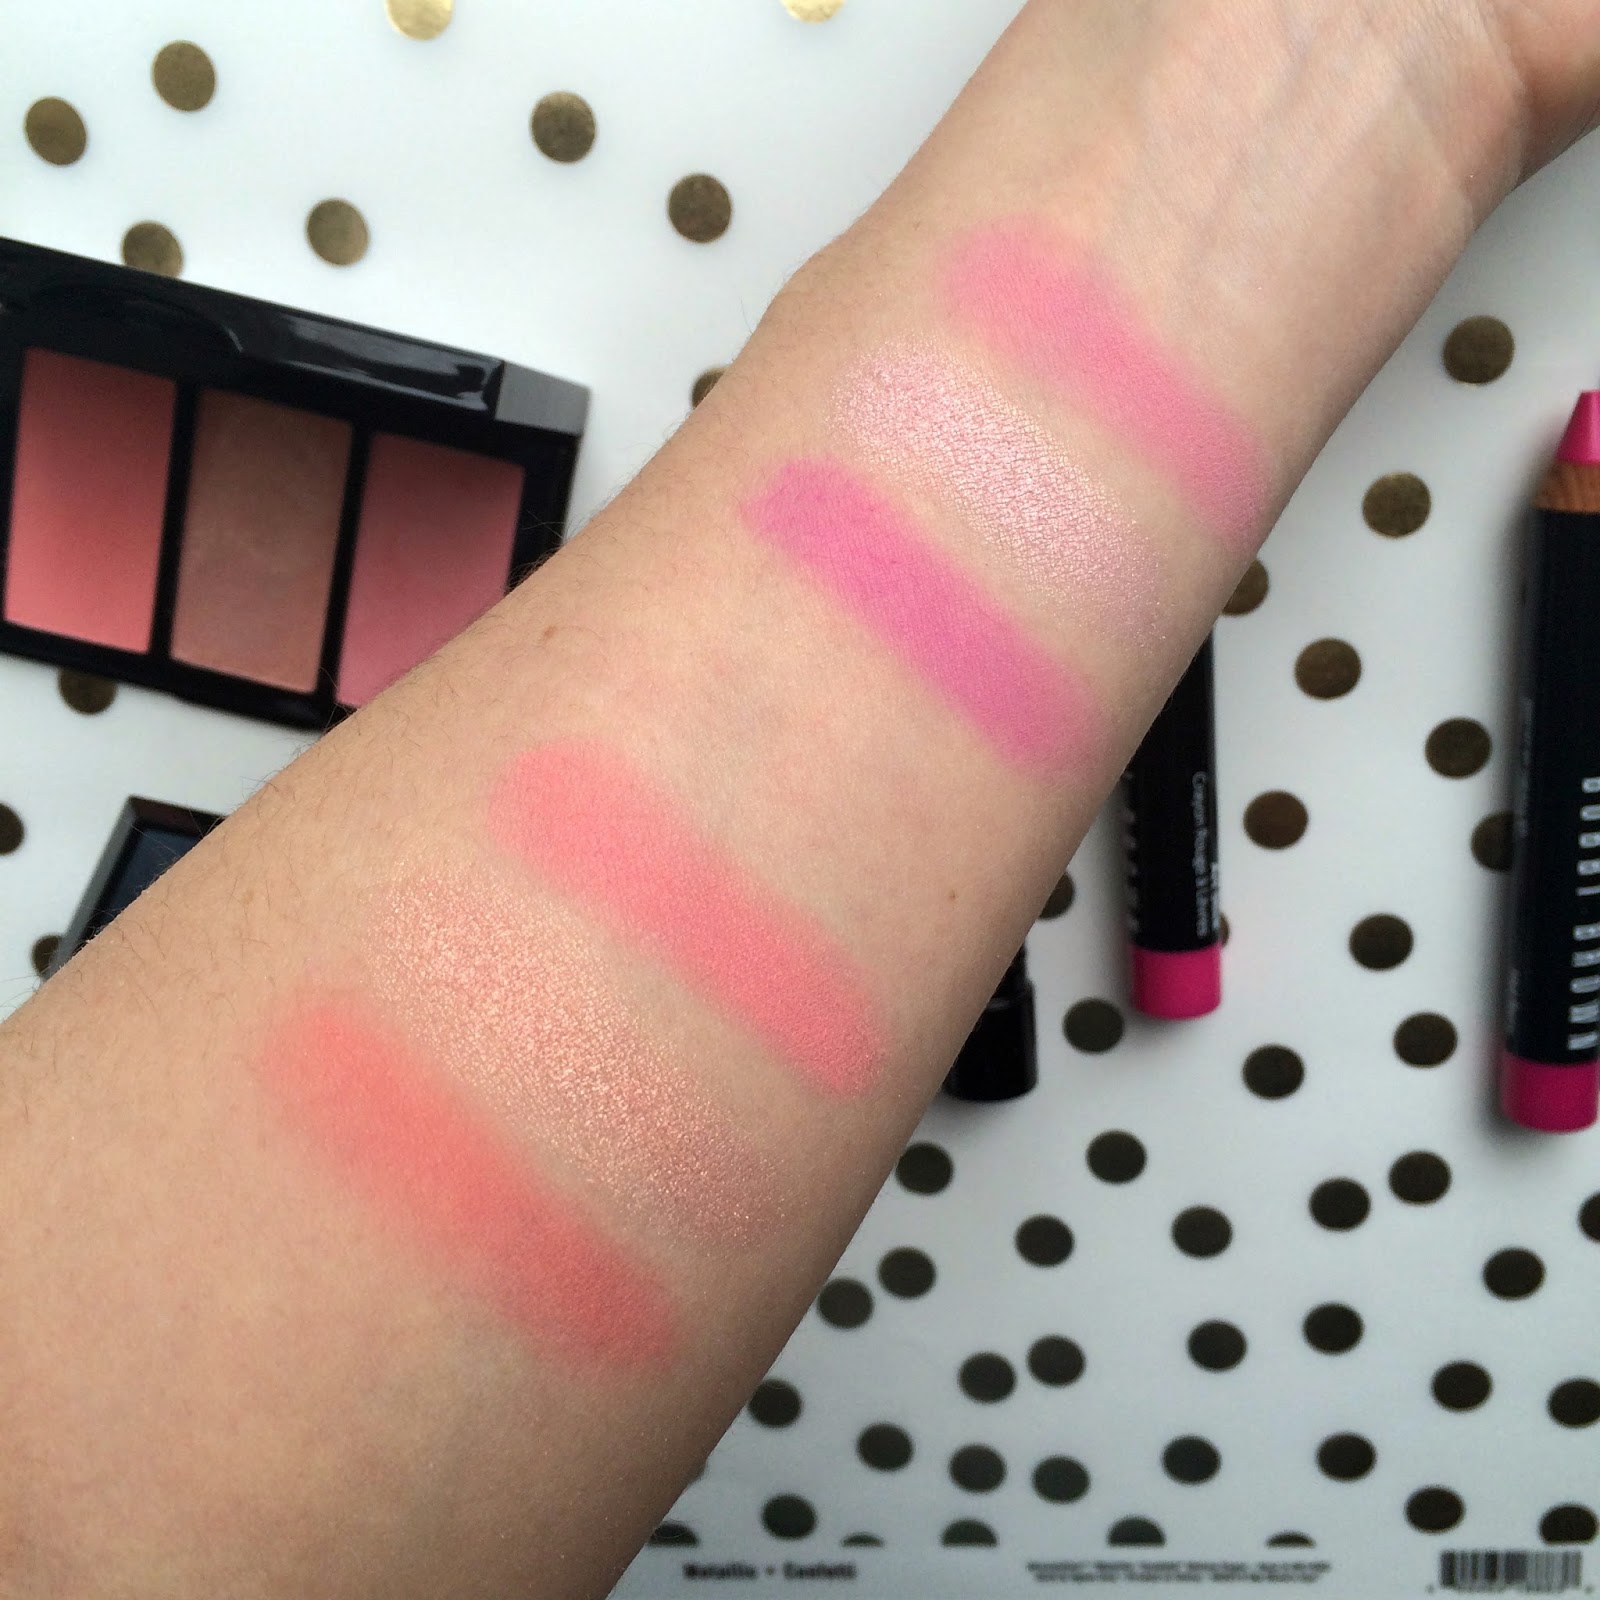 Bobbi Brown Hot Collection blush swatches for fair skin